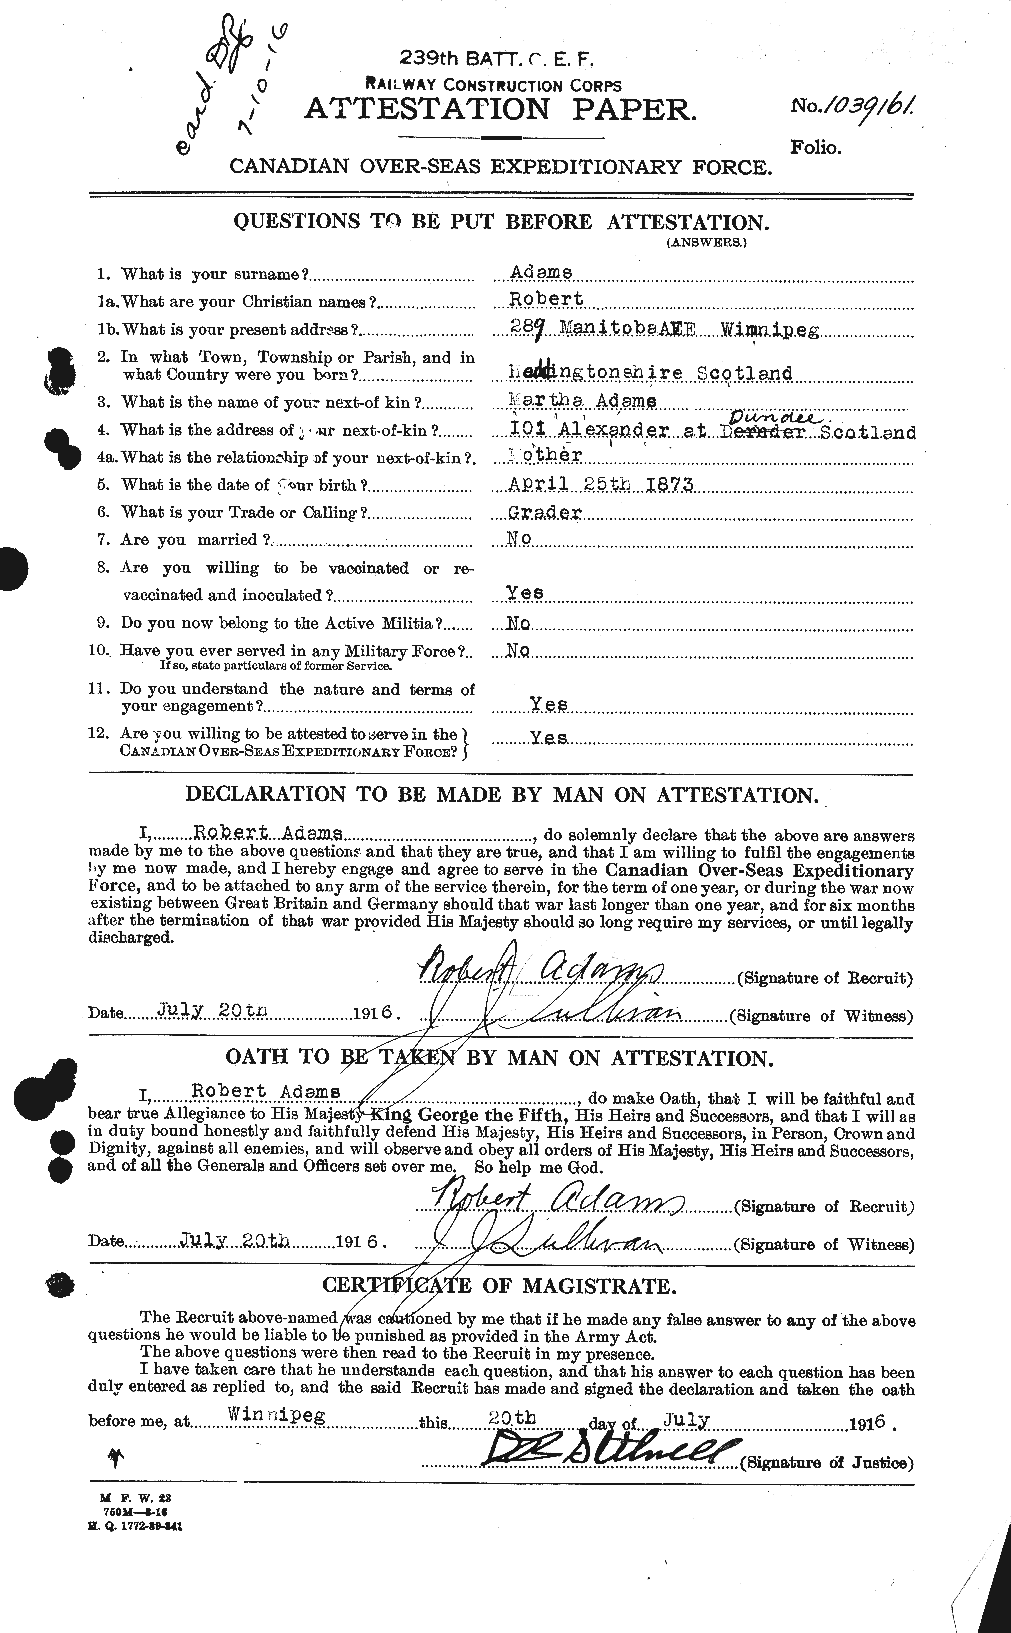 Personnel Records of the First World War - CEF 202090a